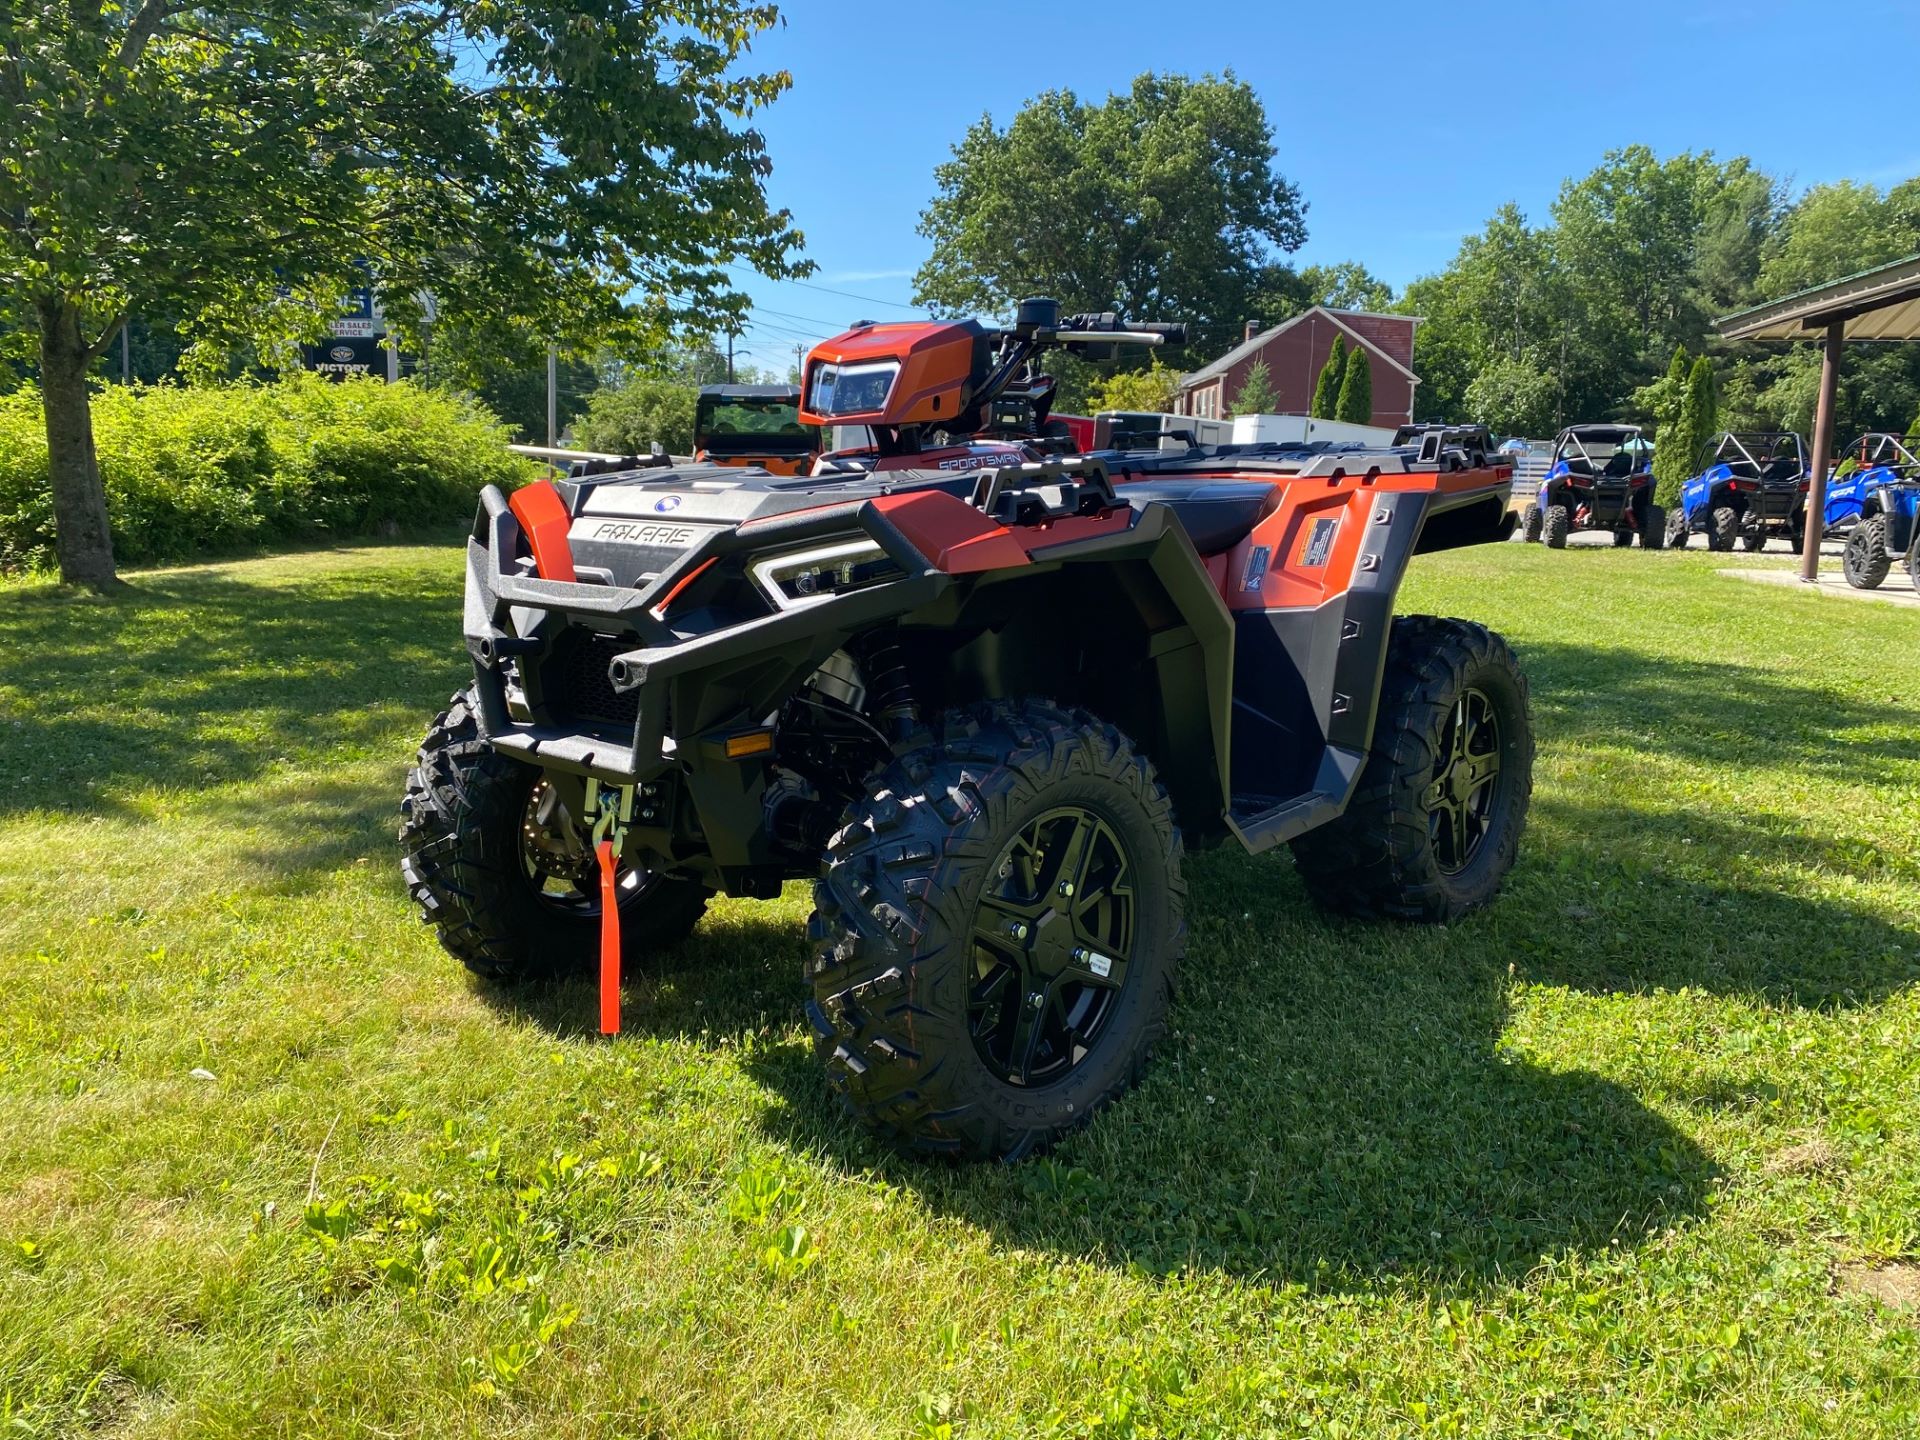 2022 Polaris Sportsman 850 Ultimate Trail in Milford, New Hampshire - Photo 5